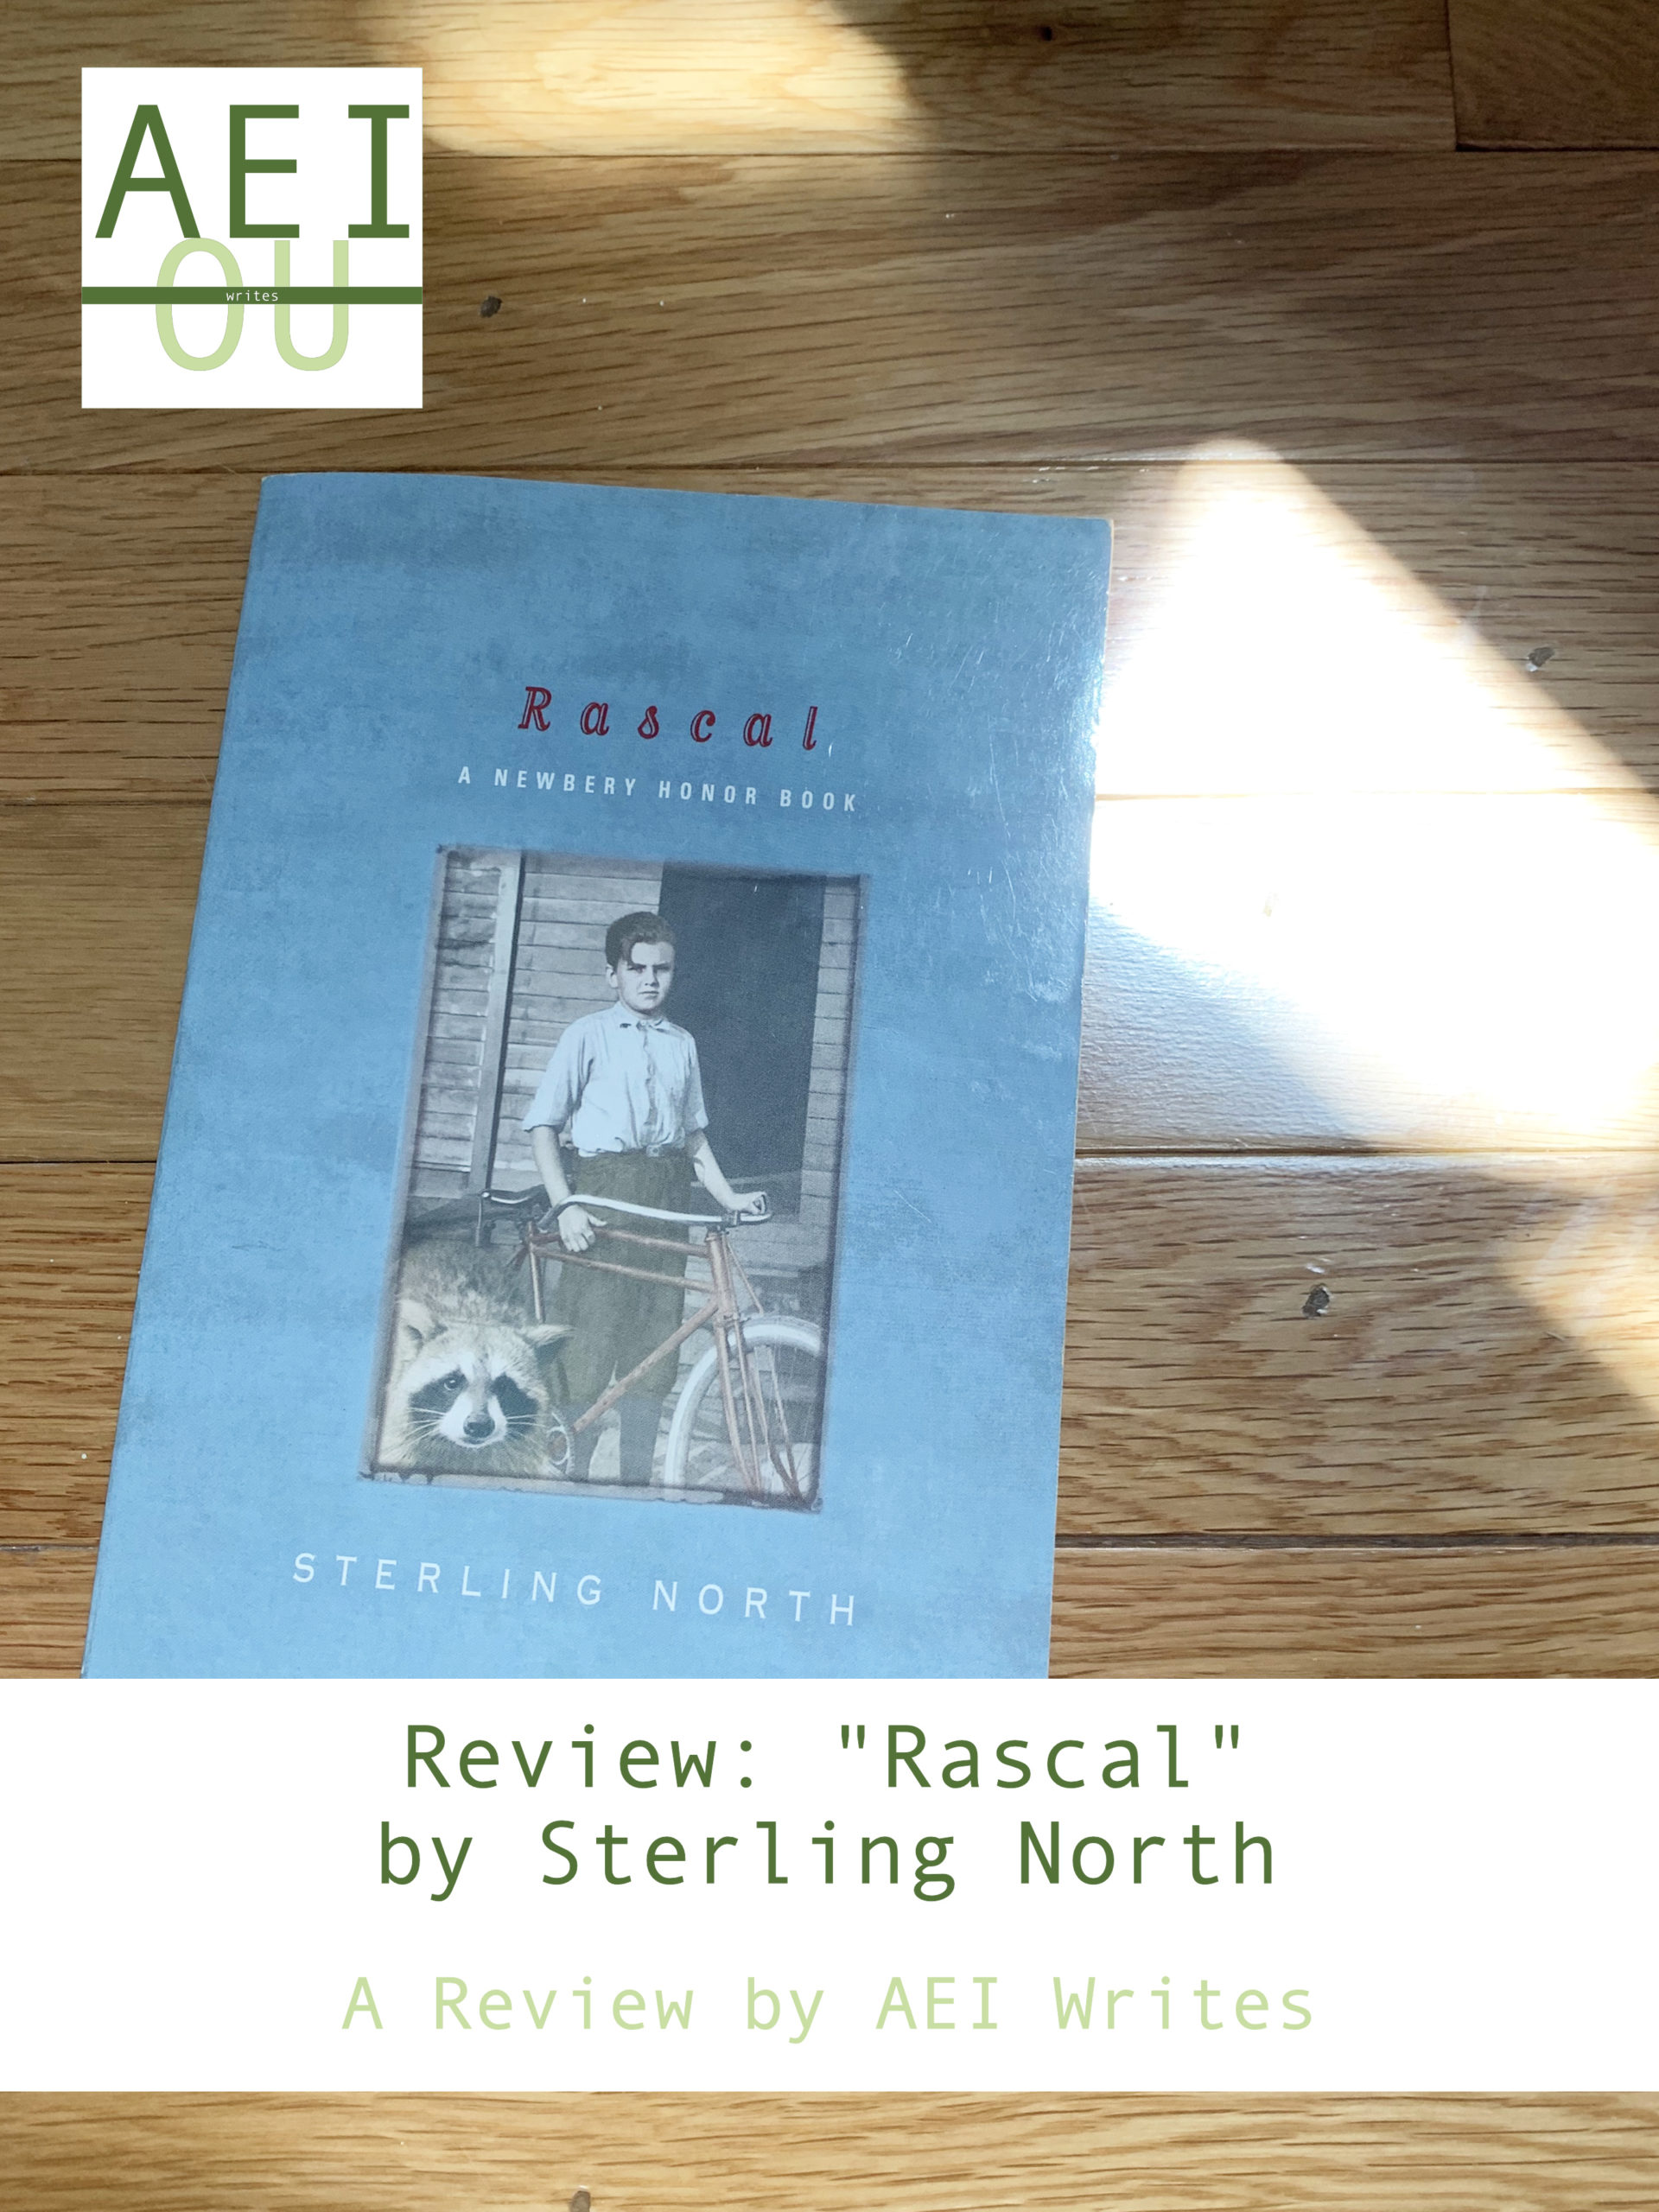 Review: “Rascal” by Sterling North